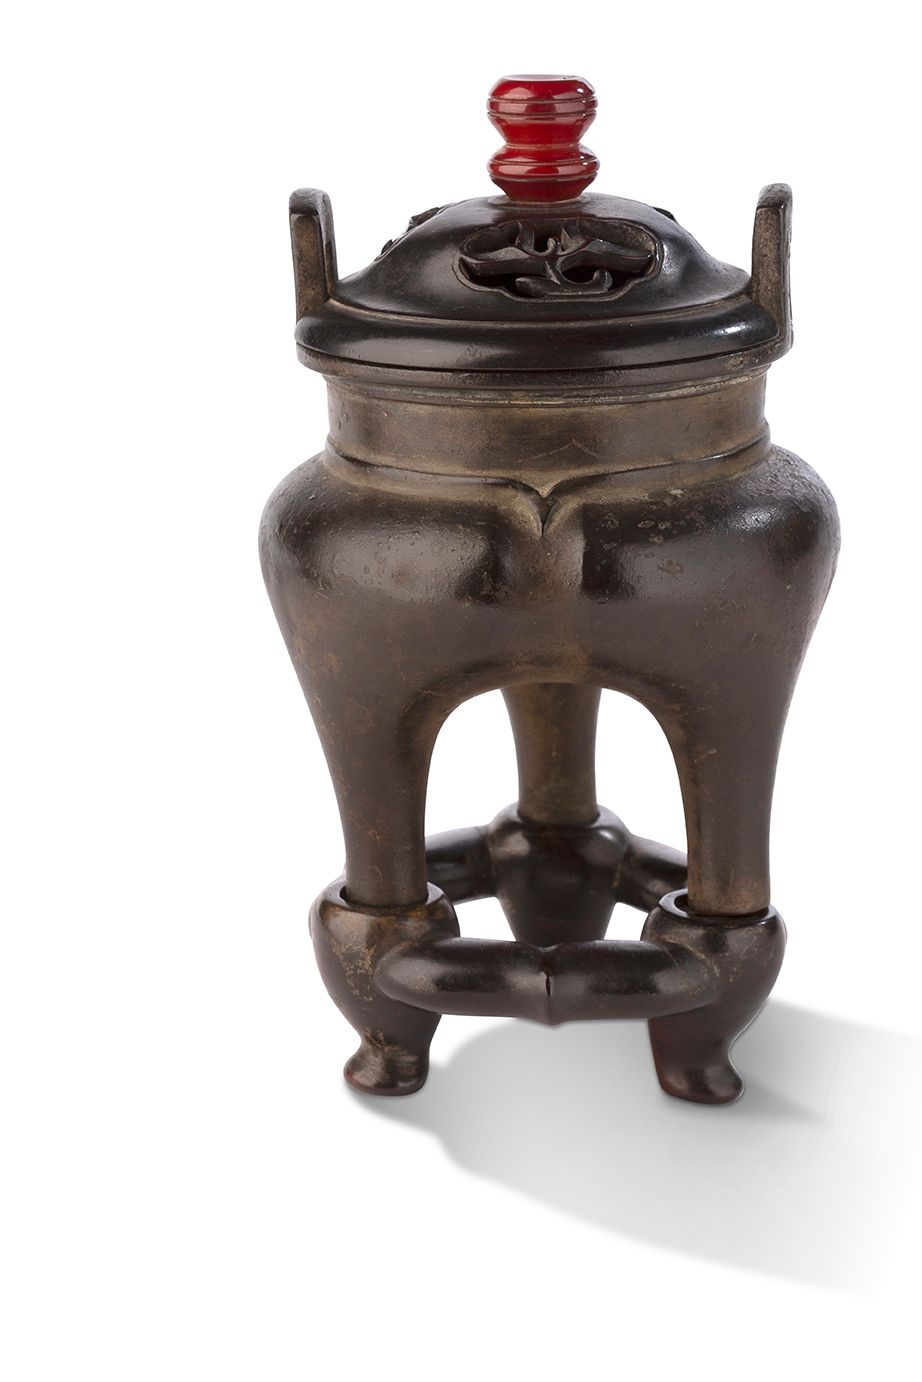 CHINE XVIIe SIÈCLE Small tripod incense burner
In bronze with brown patina, the &hellip;